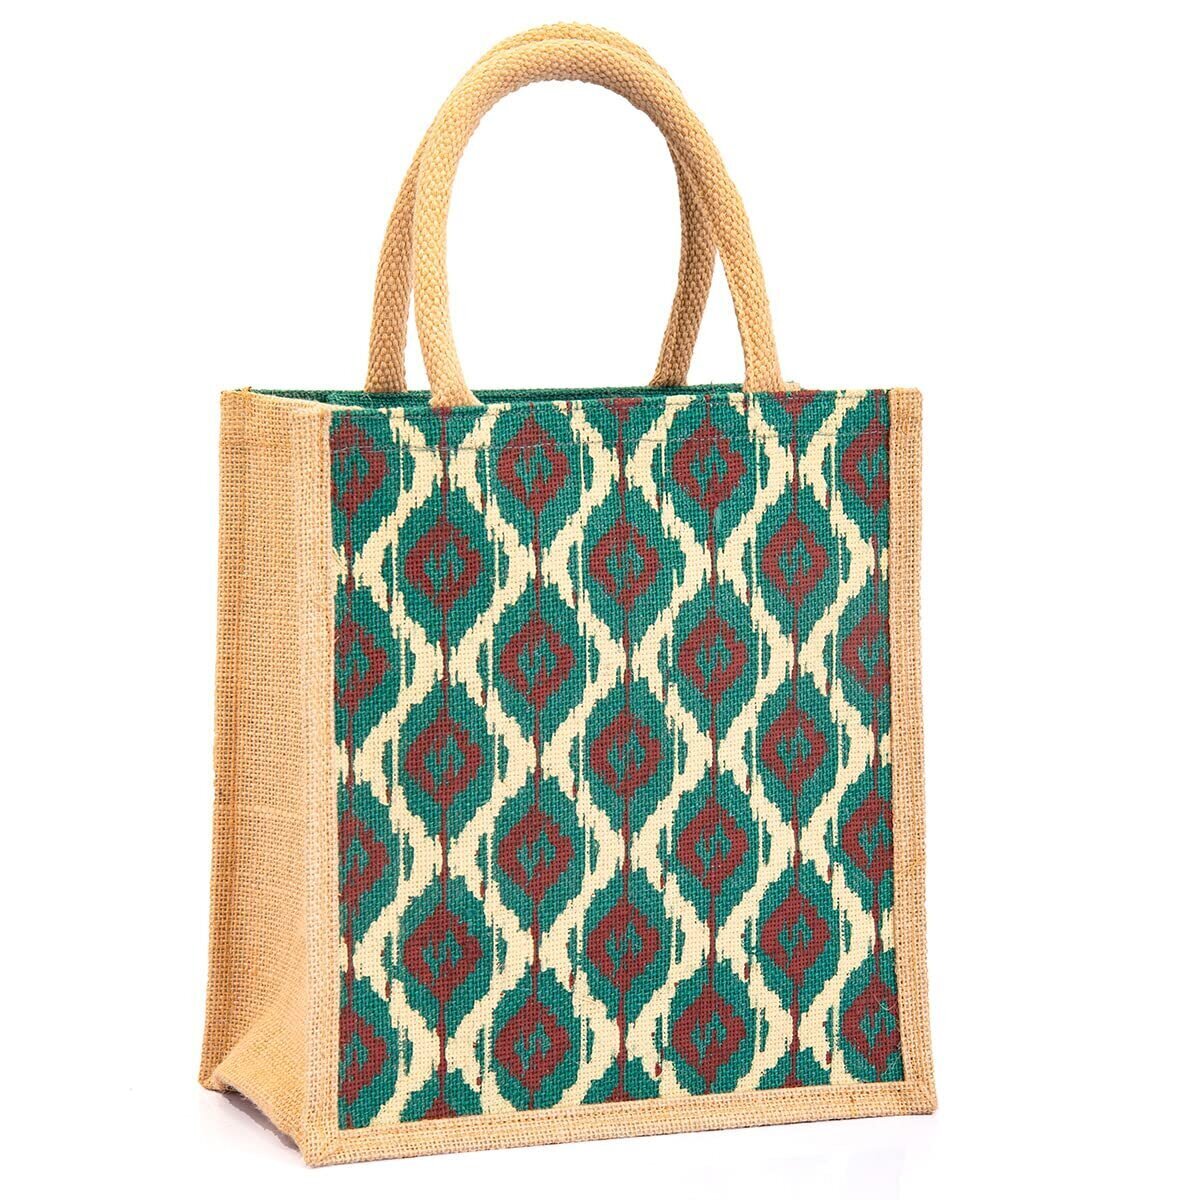 Custom Tote SET of 10 BAGS, cotton jute fabric | Motif | Sustainable  Fabrics & Ethical Products Handmade in Bangladesh